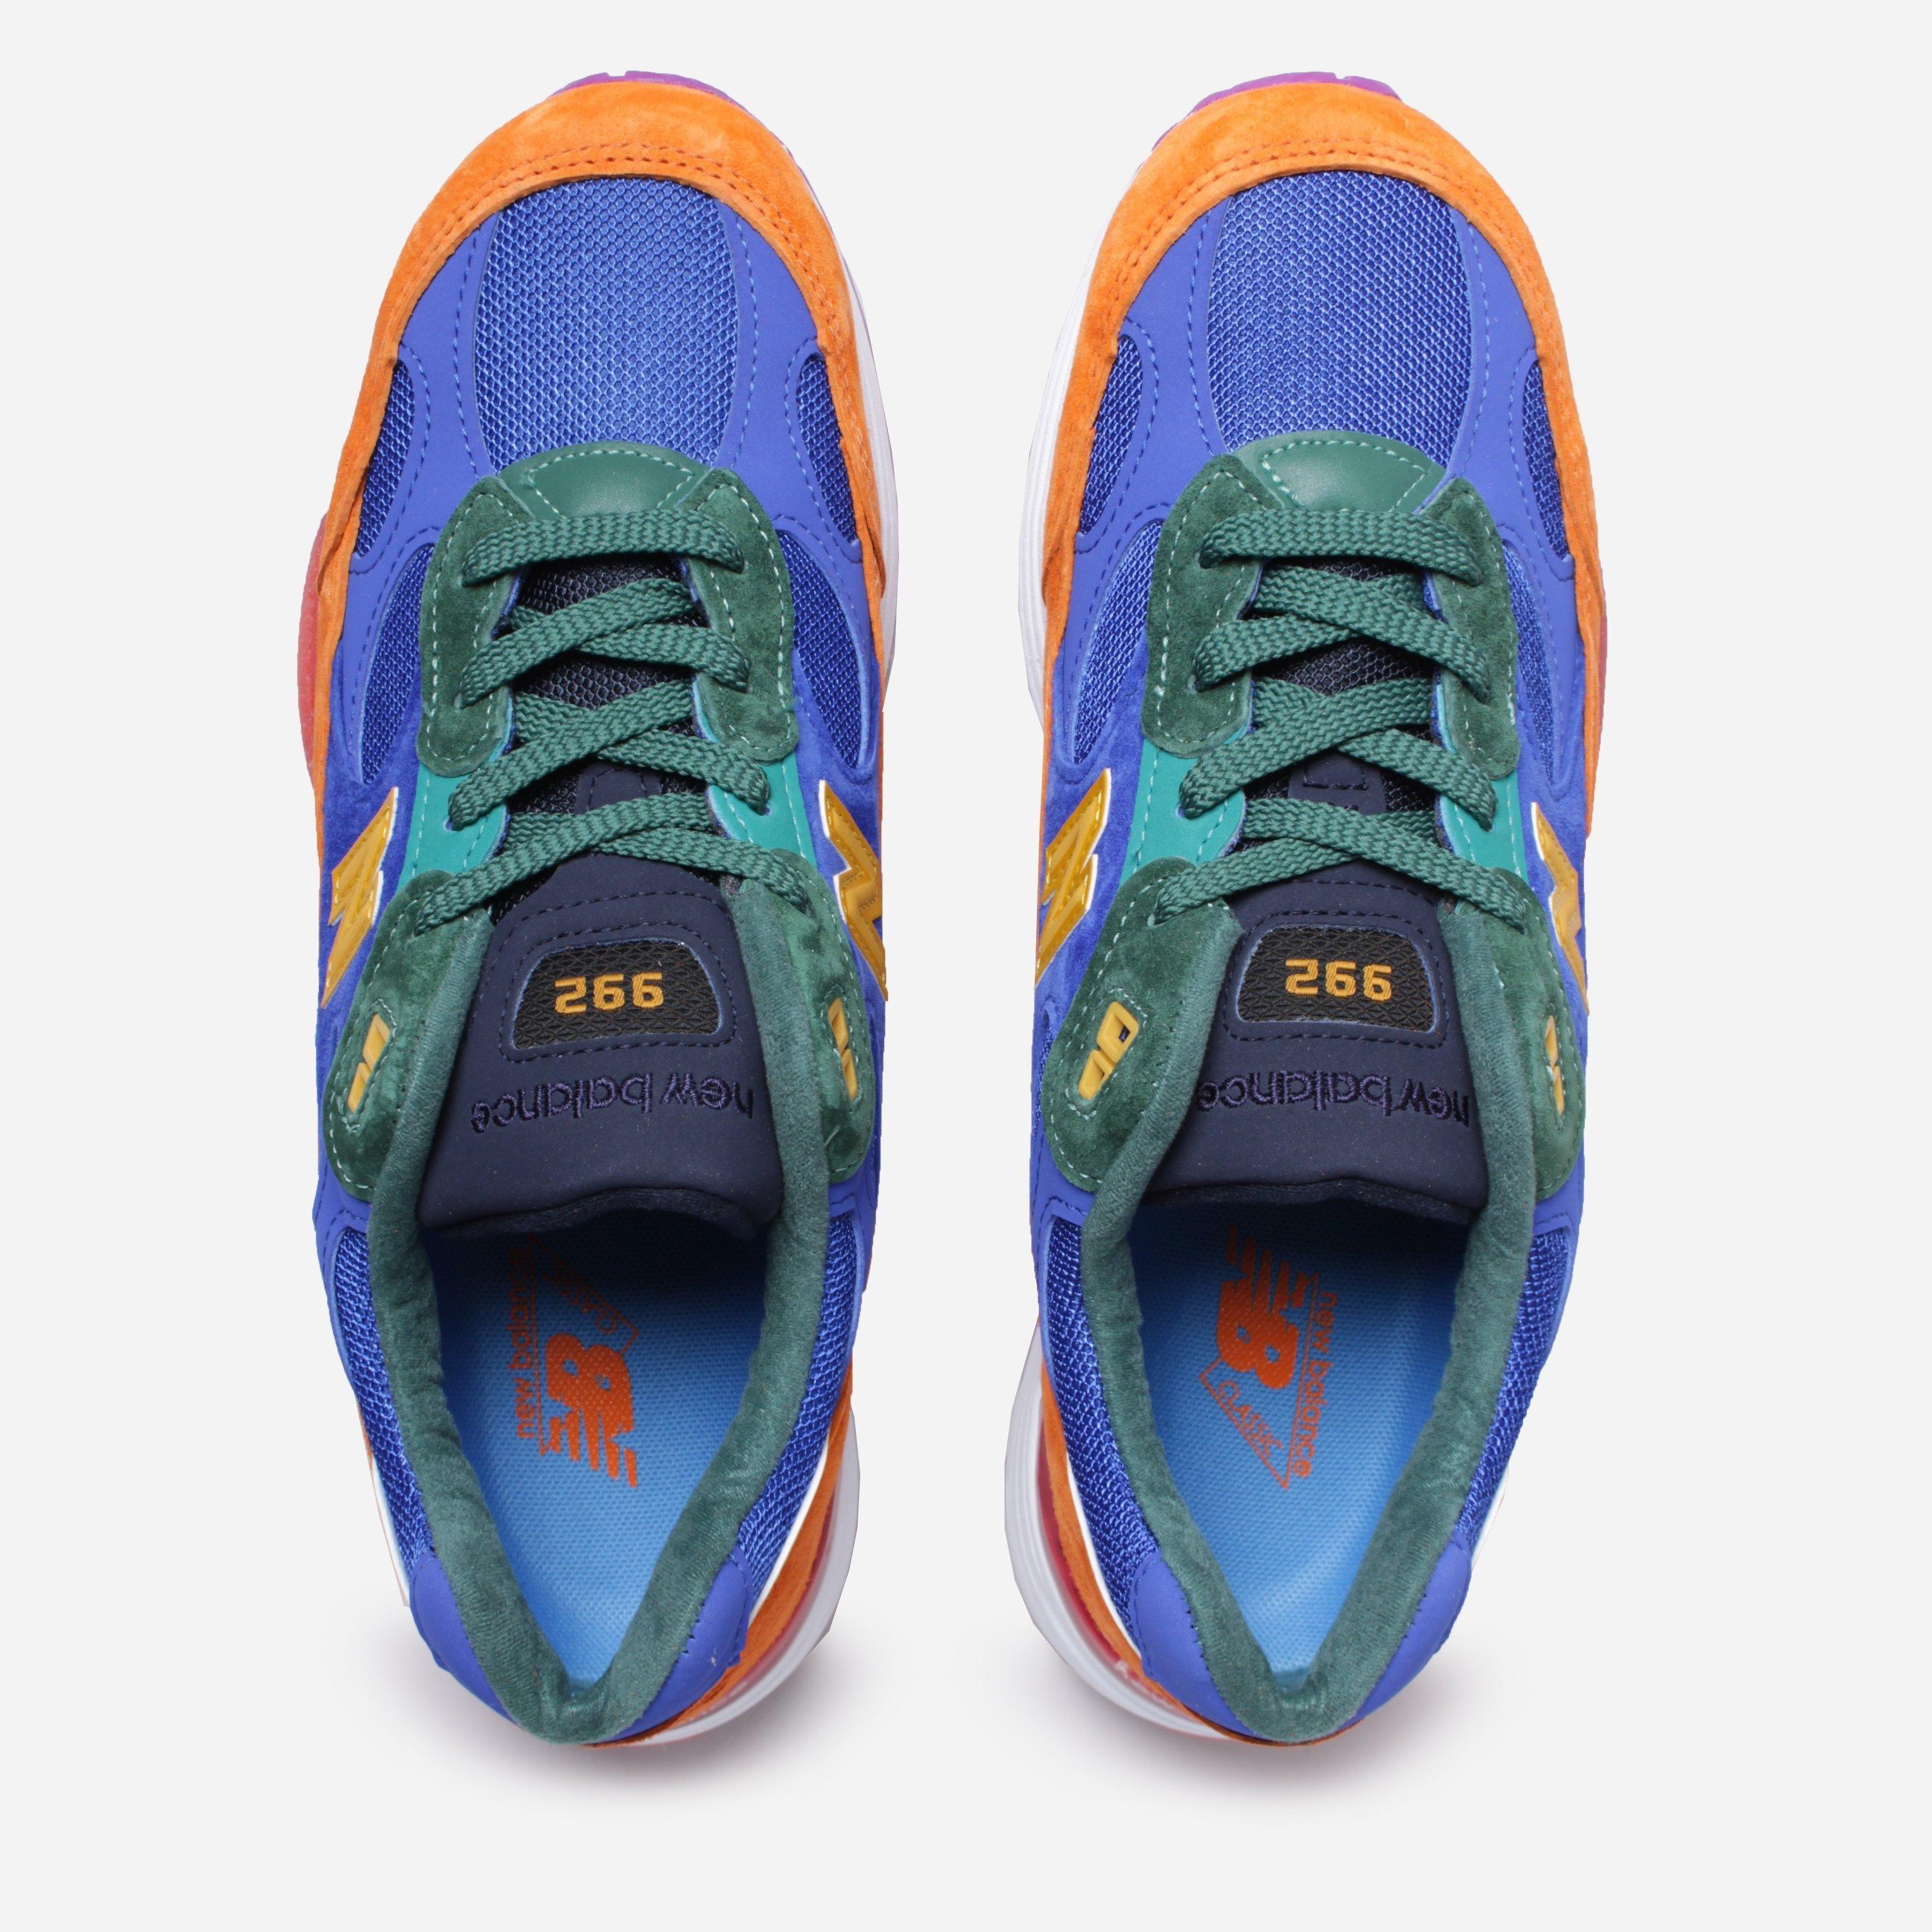 New Balance Suede 992 Low-top Sneakers in Orange/Blue/Yellow (Blue 